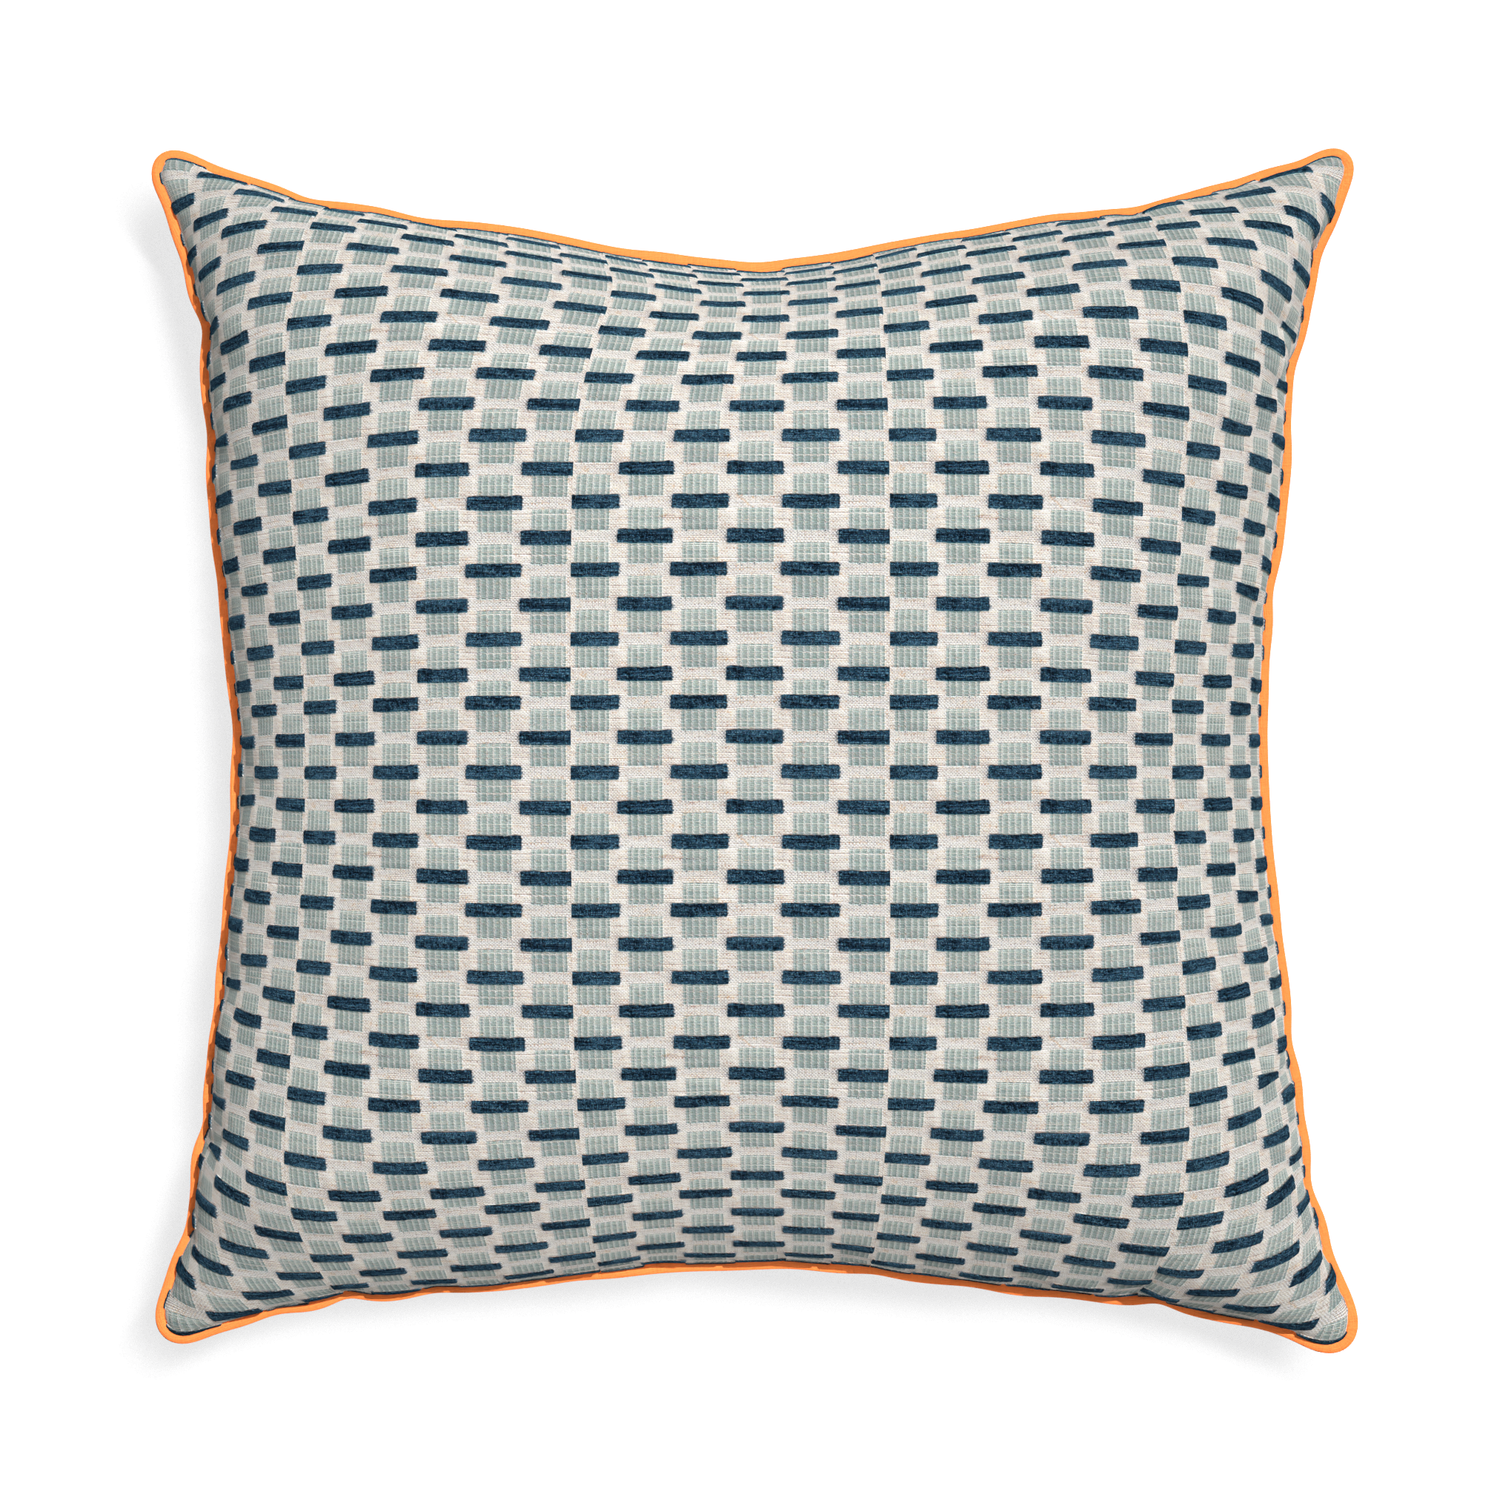 Euro-sham willow amalfi custom blue geometric chenillepillow with clementine piping on white background